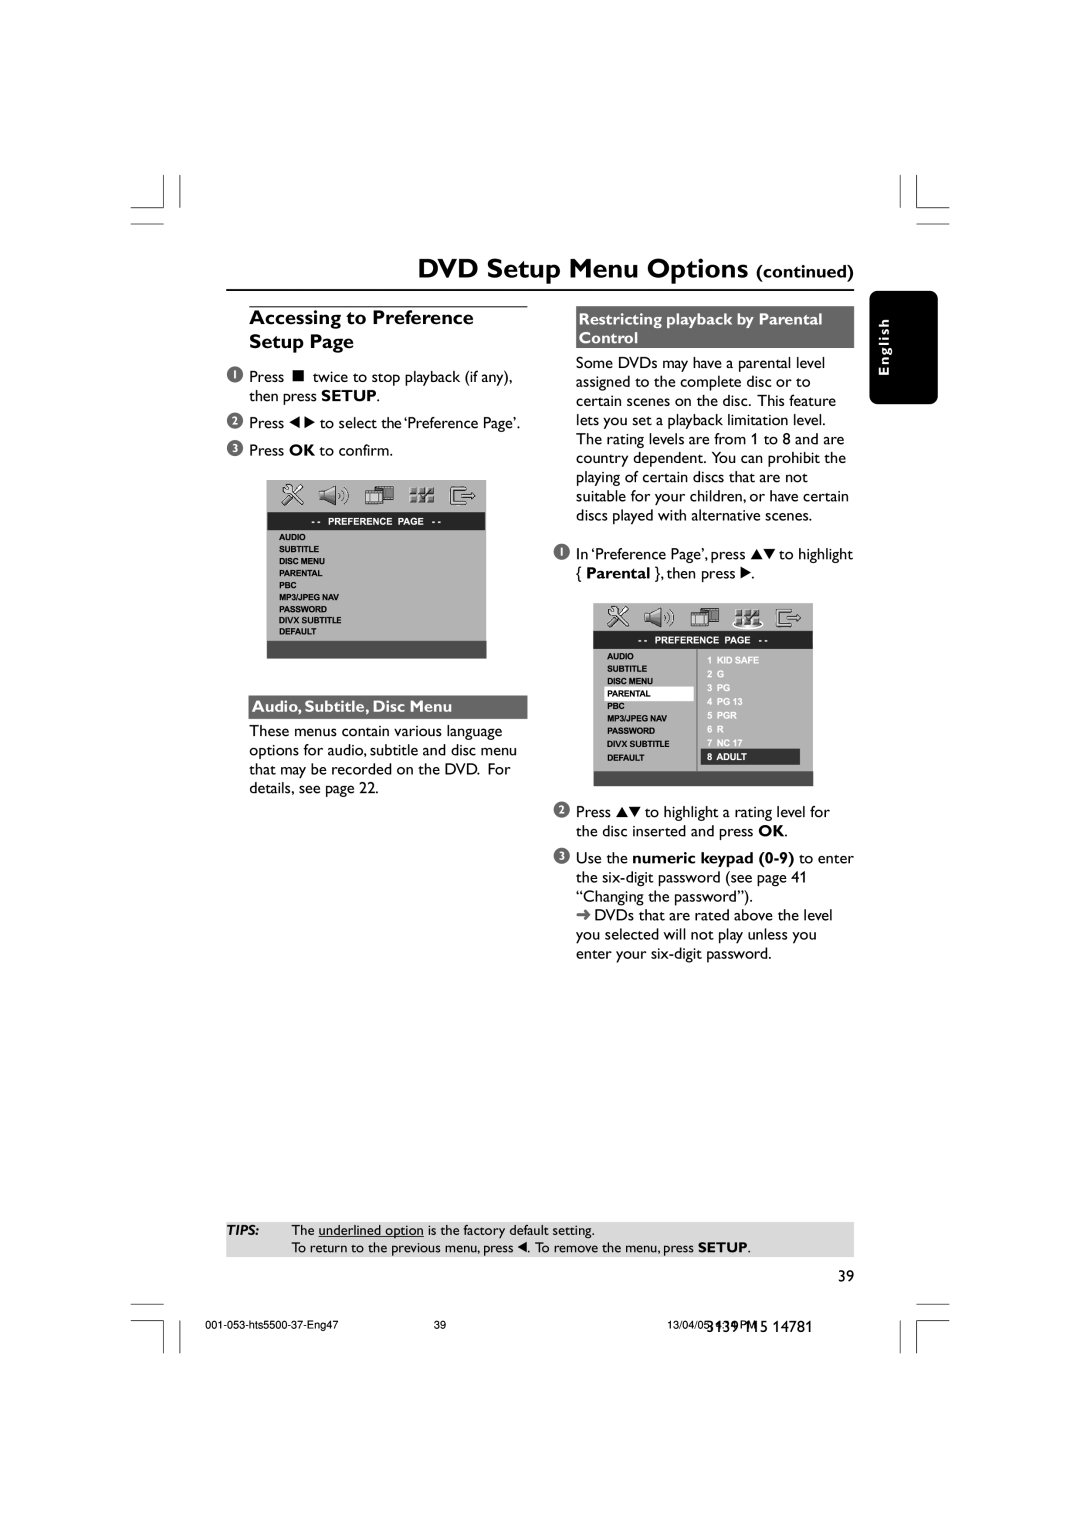 Philips HTS5500C/37B Accessing to Preference Setup Page, DVD Setup Menu Options continued, Audio, Subtitle, Disc Menu 